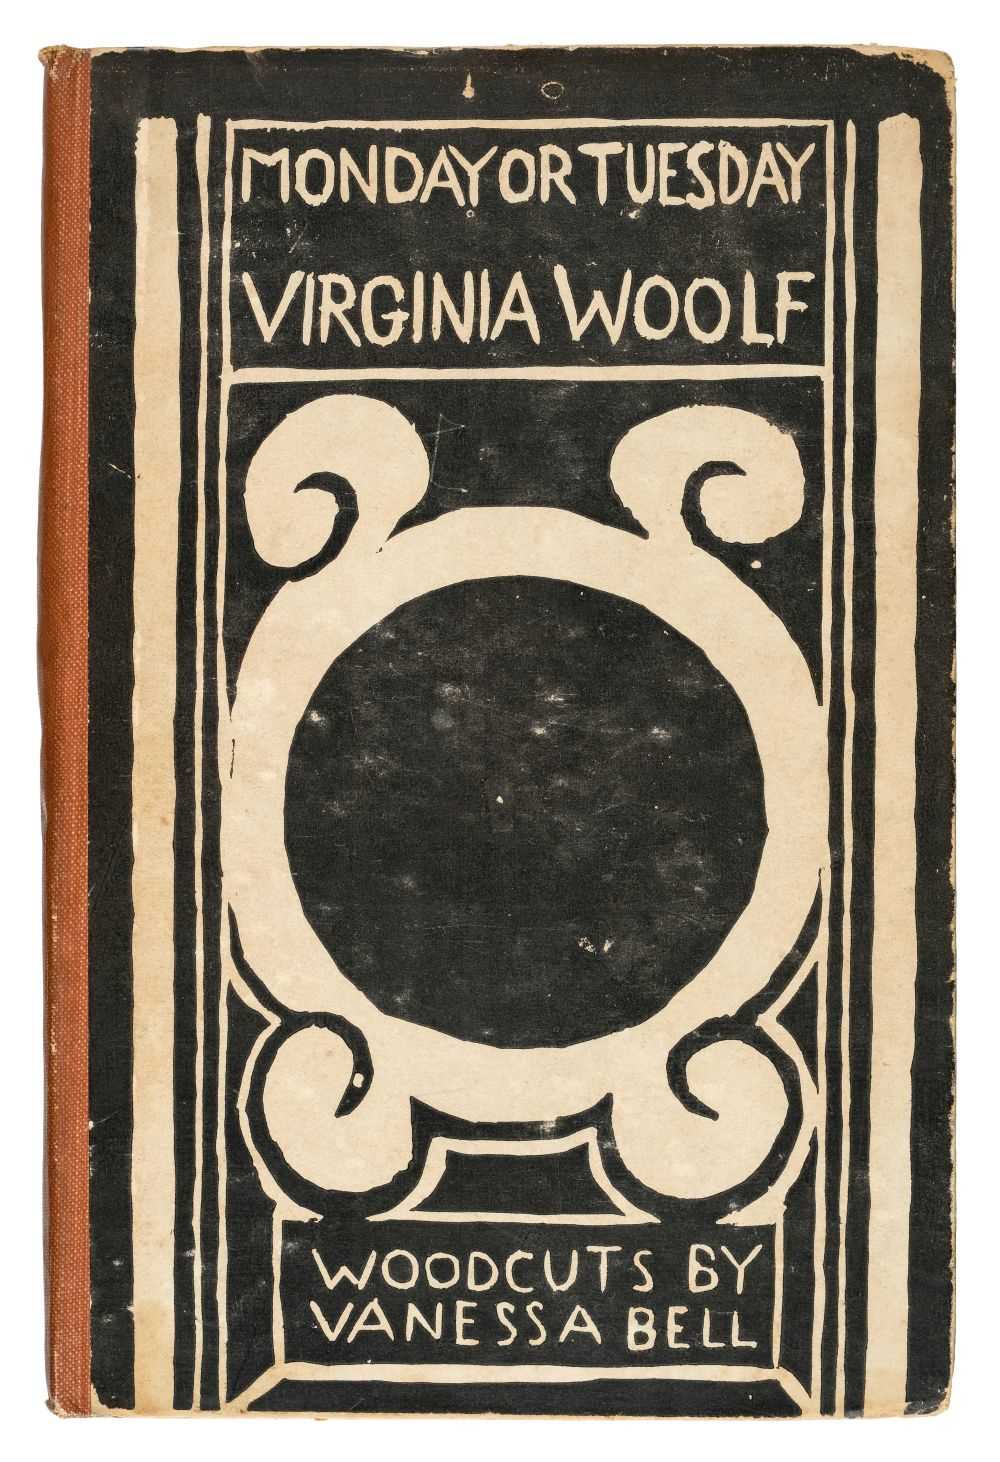 Lot 767 - Woolf (Virginia). Monday or Tuesday, with woodcuts by Vanessa Bell, 1st edition, Hogarth, 1921